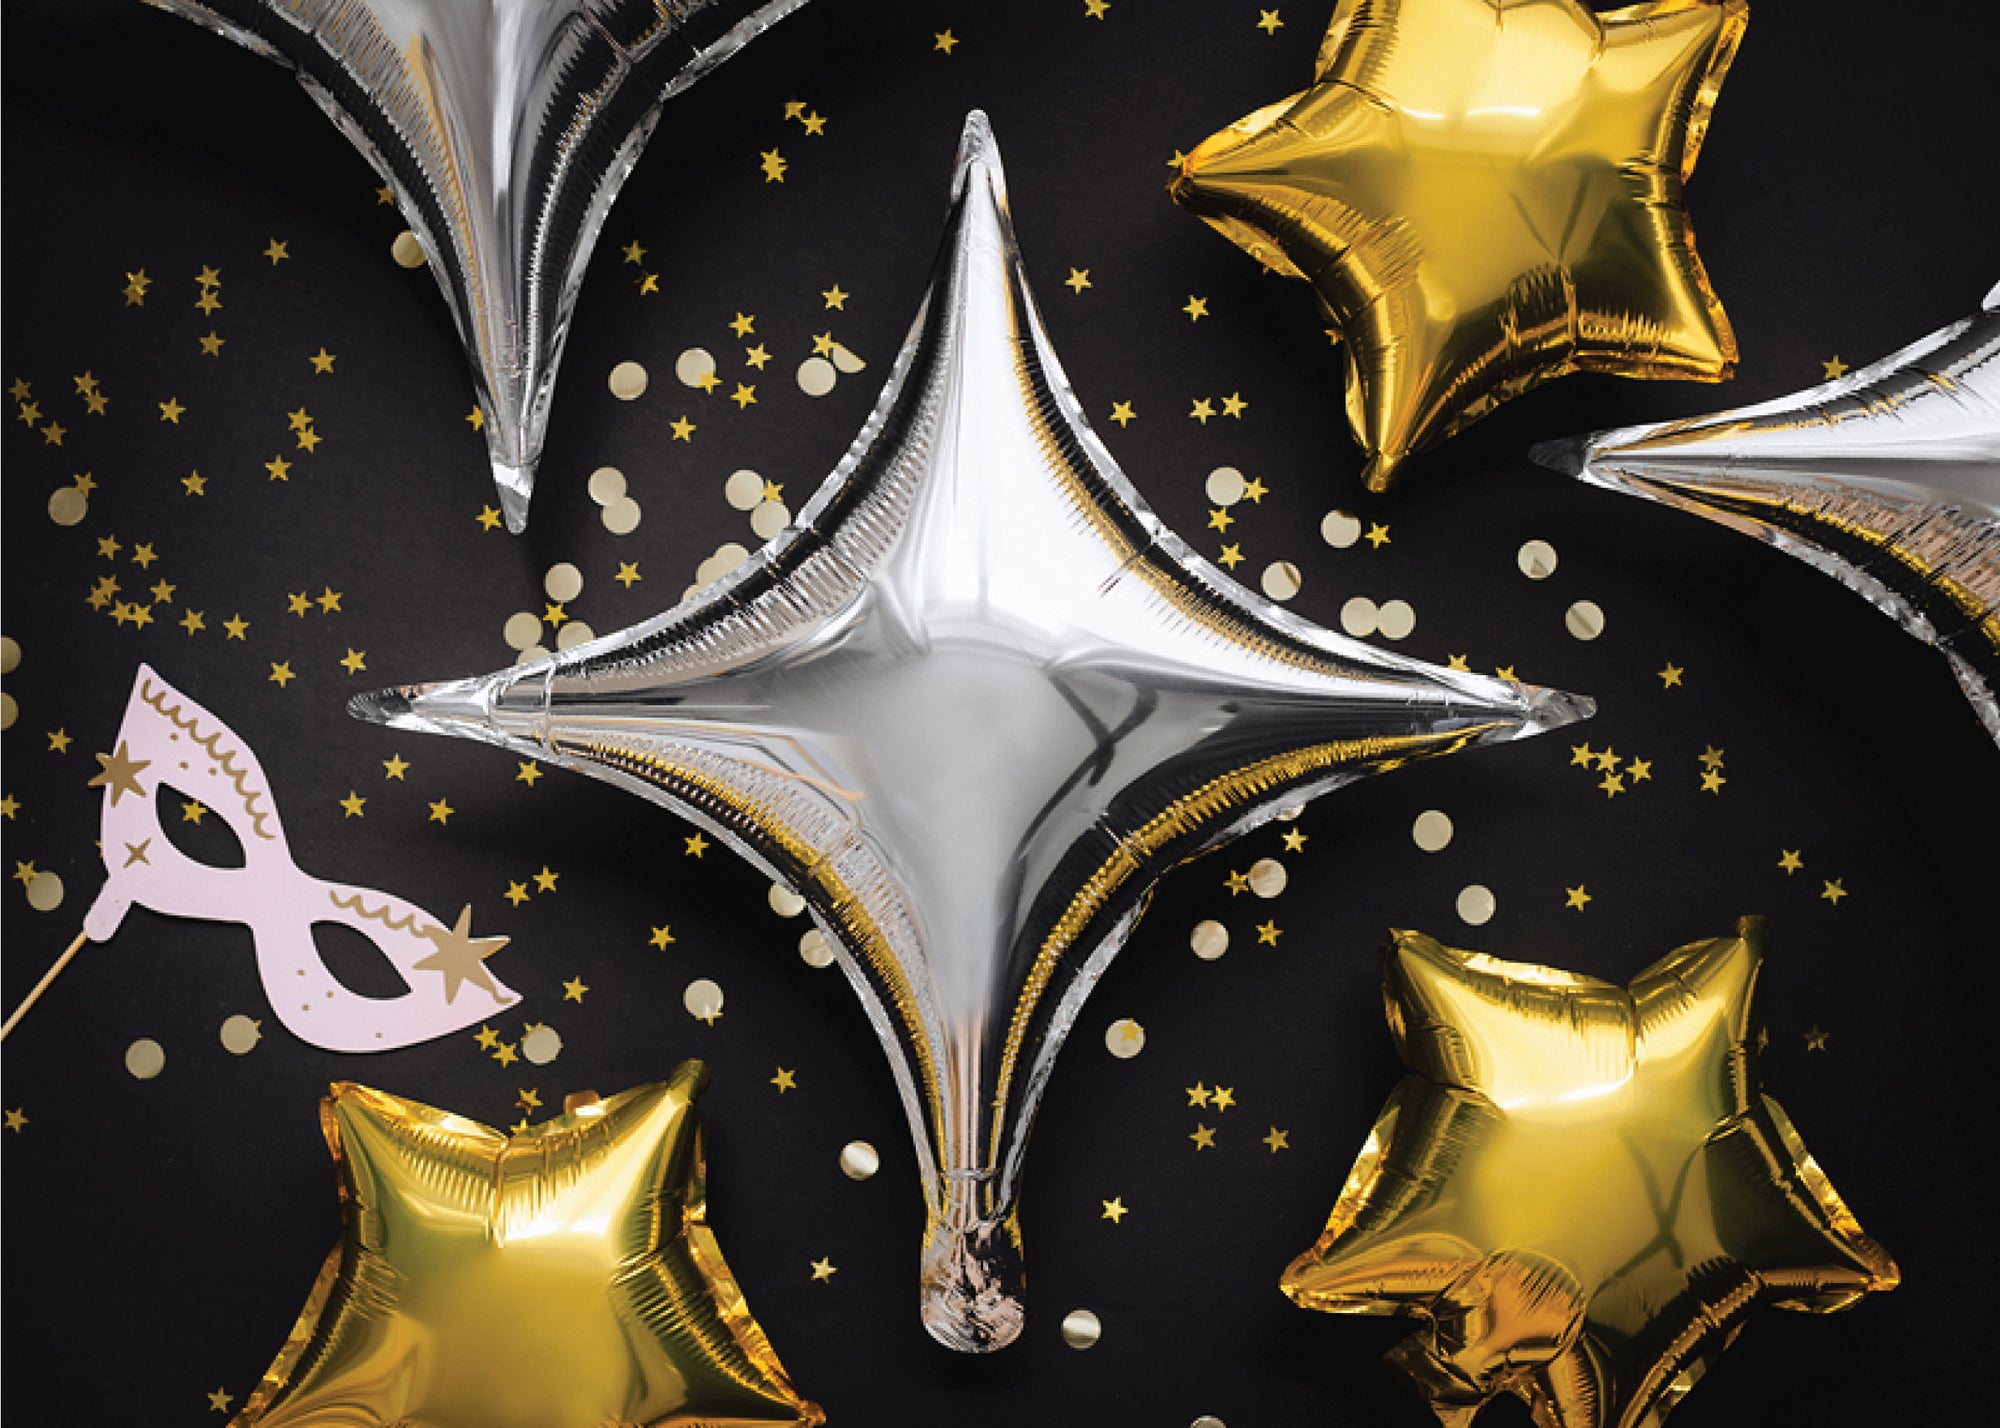 Metallic Silver Starpoint Balloon 16.5in | The Party Darling